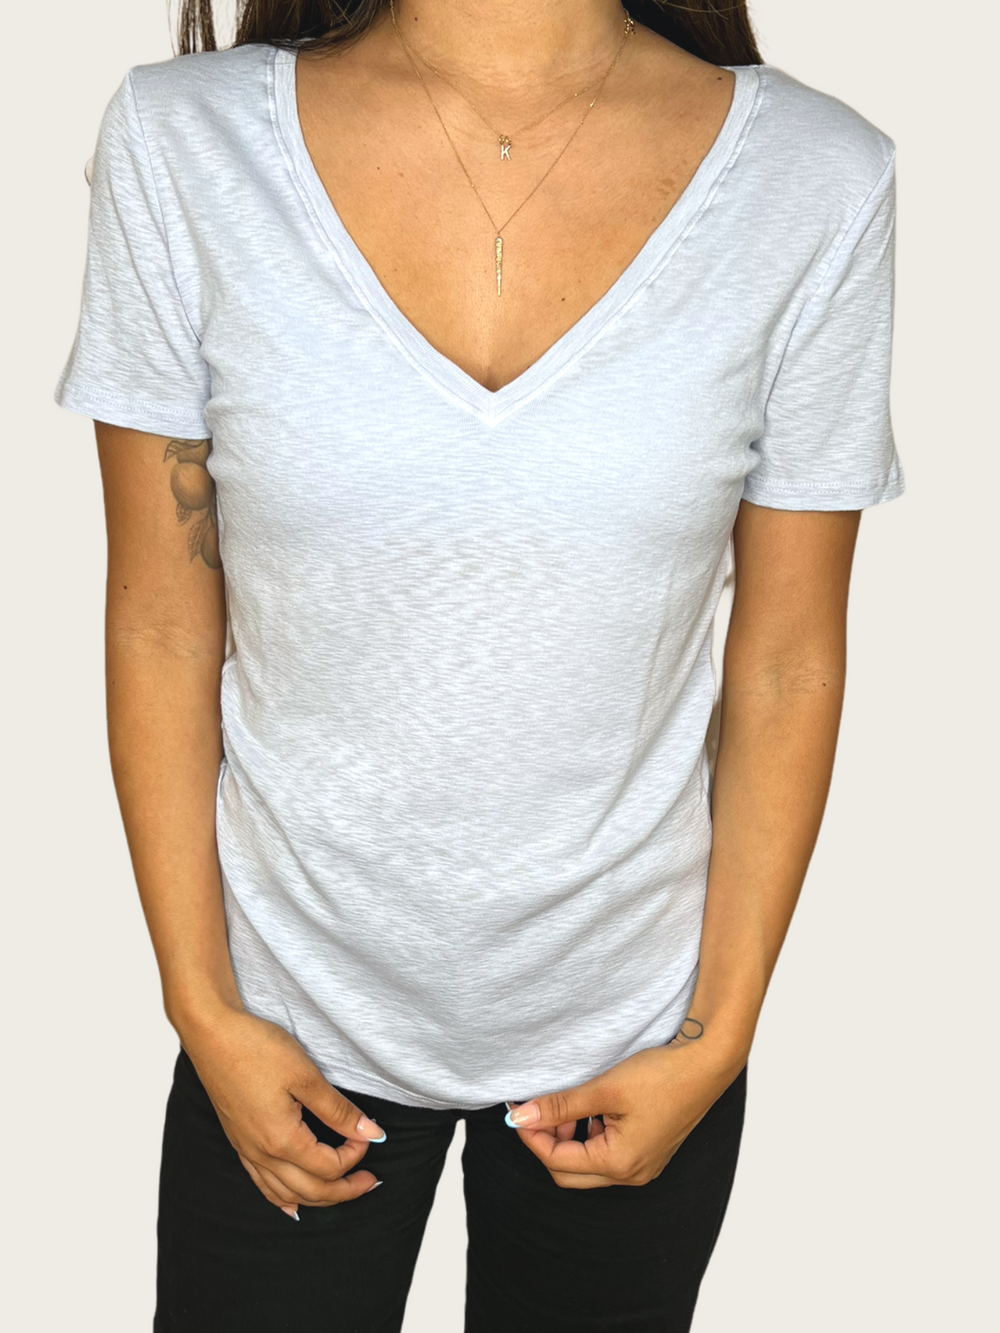 VEIL NIA V-NECK TEE - Kingfisher Road - Online Boutique